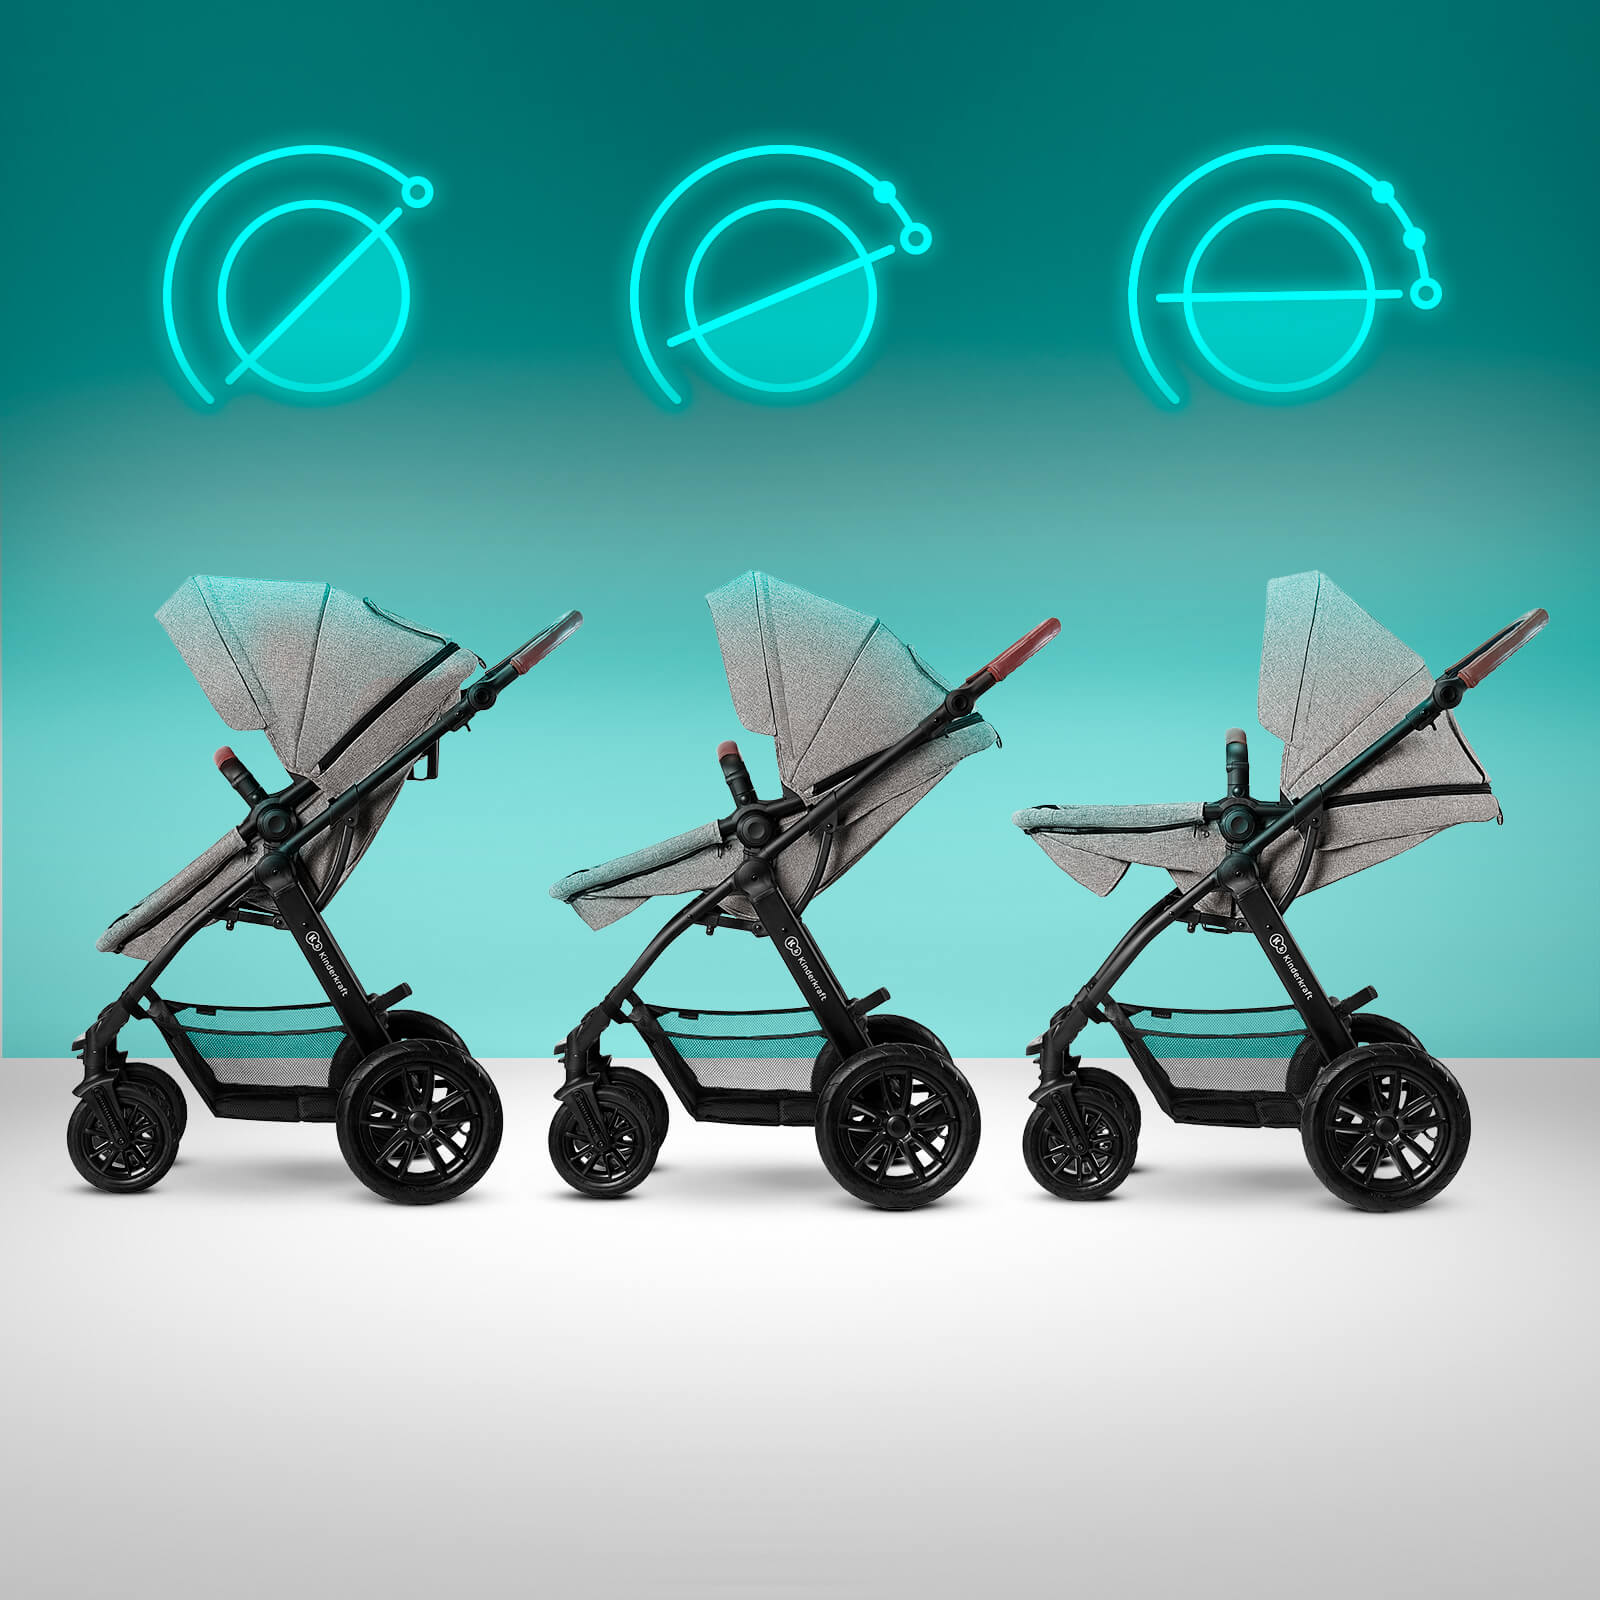 Multifunctional stroller 3in1 XMOOV - 3 positions of the seat